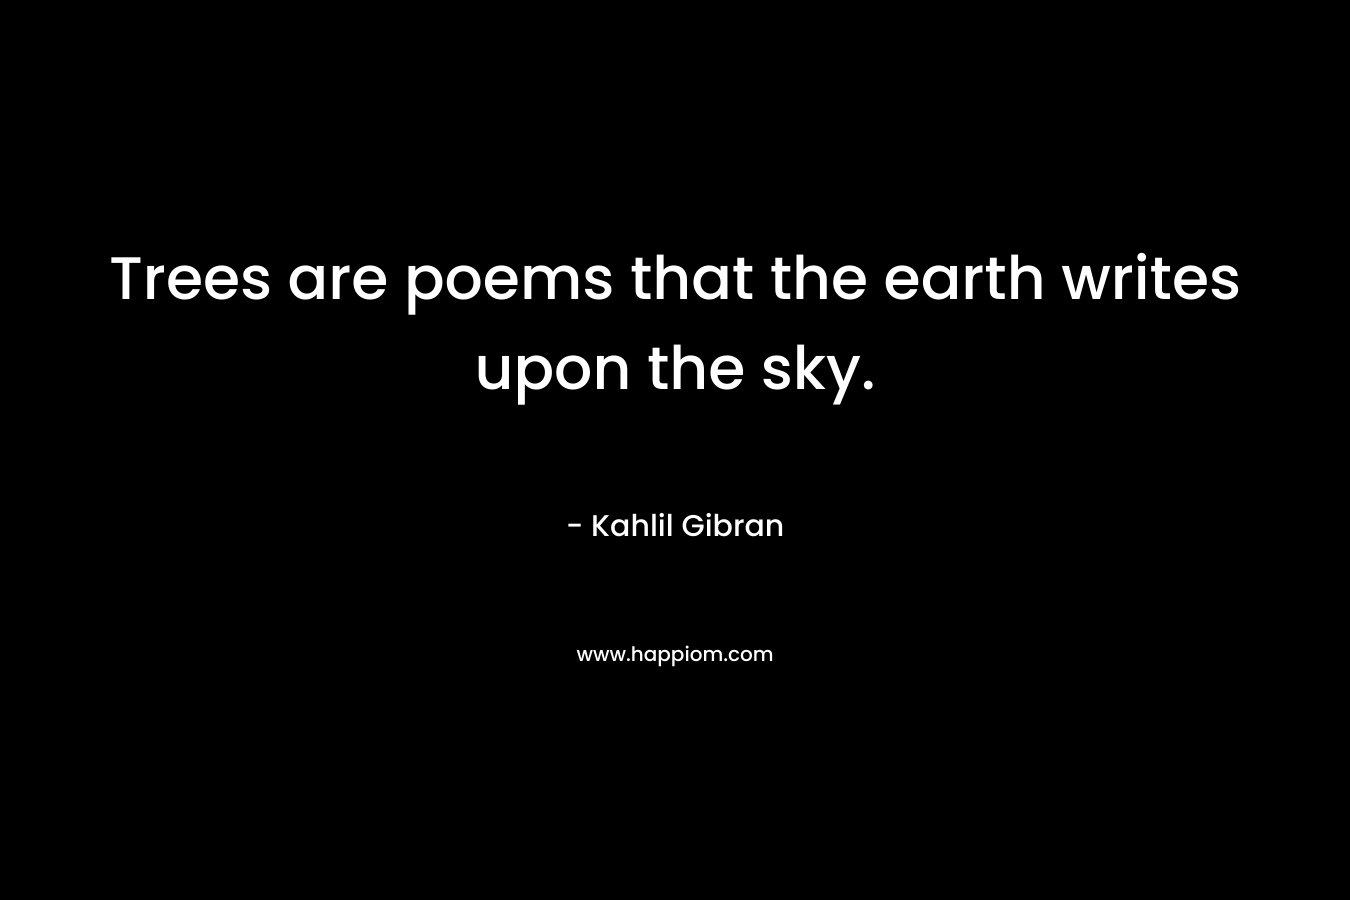 Trees are poems that the earth writes upon the sky. – Kahlil Gibran